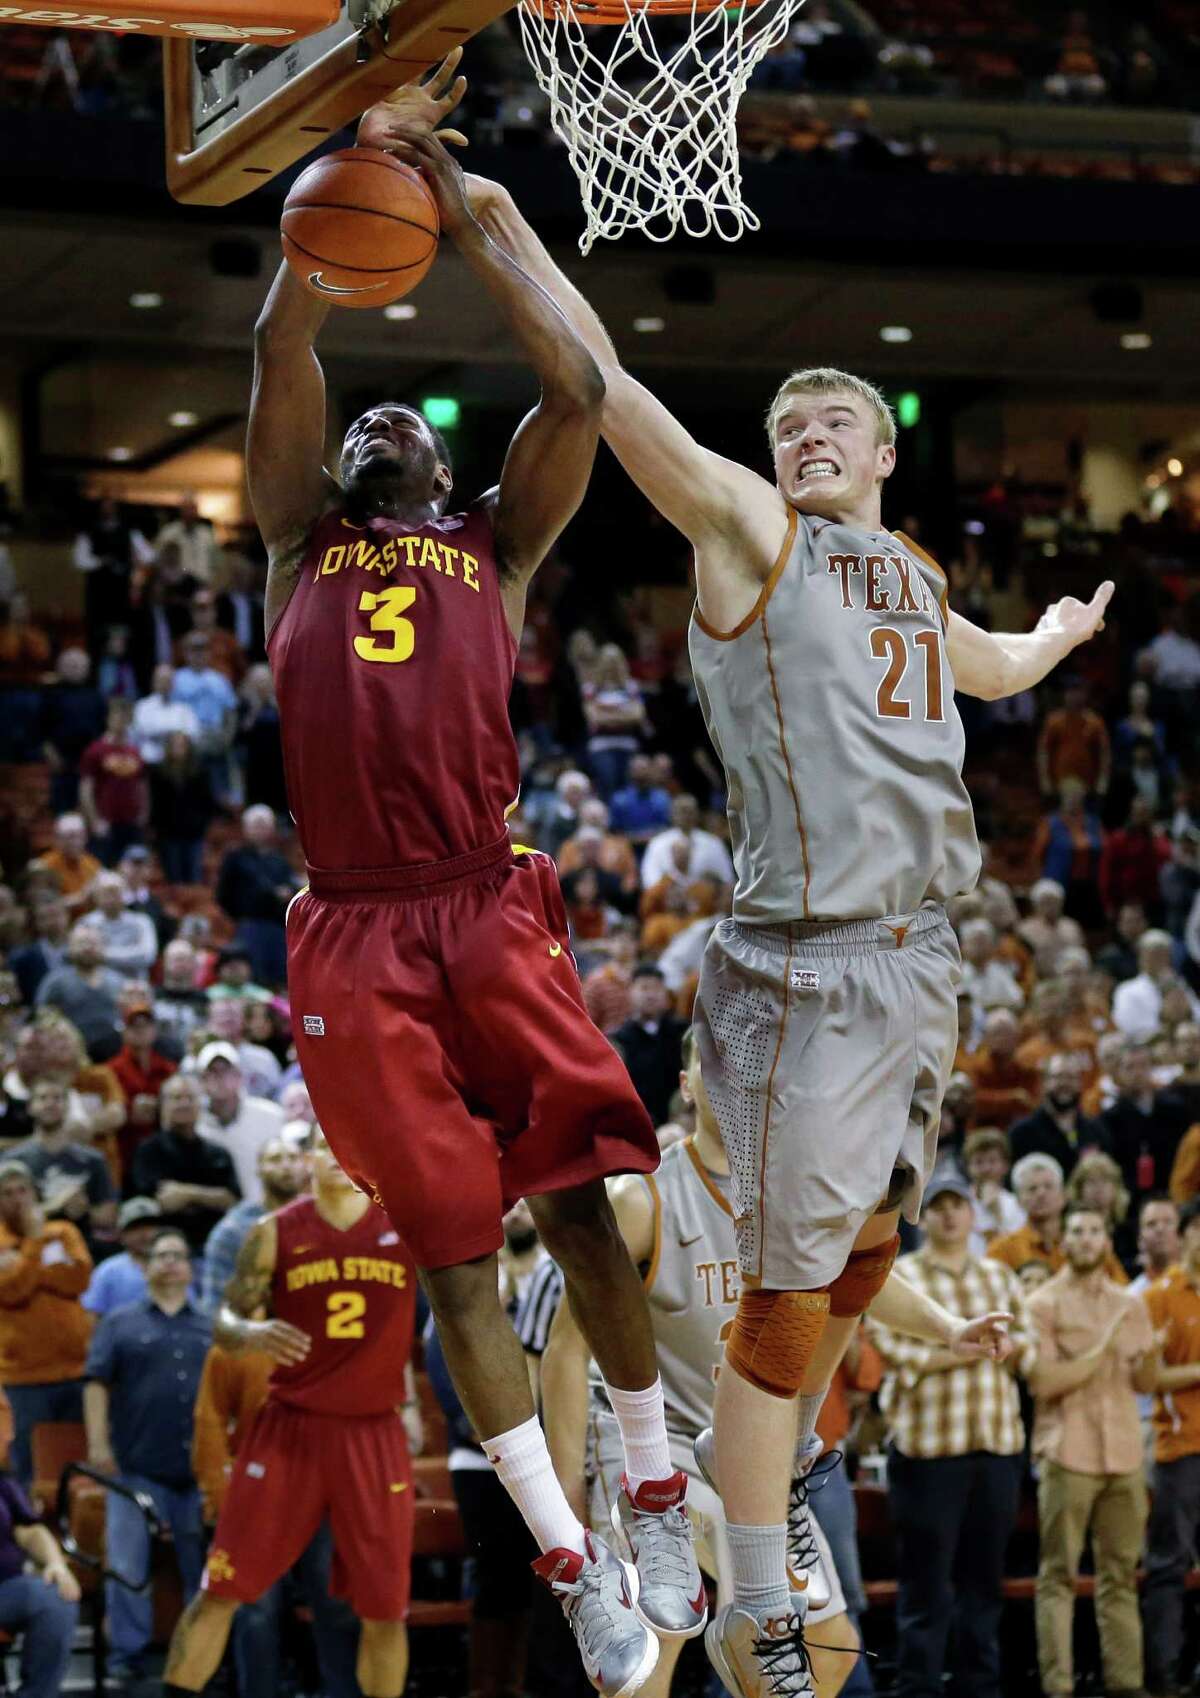 Texas' Connor Lammert (21) blocks Iowa State's Melvin Ejim (3) during overtime of an NCAA college basketball game, Wednesday, Feb. 13, 2013, in Austin, Texas. Texas won 89-86 in double overtime. (AP Photo/Eric Gay)